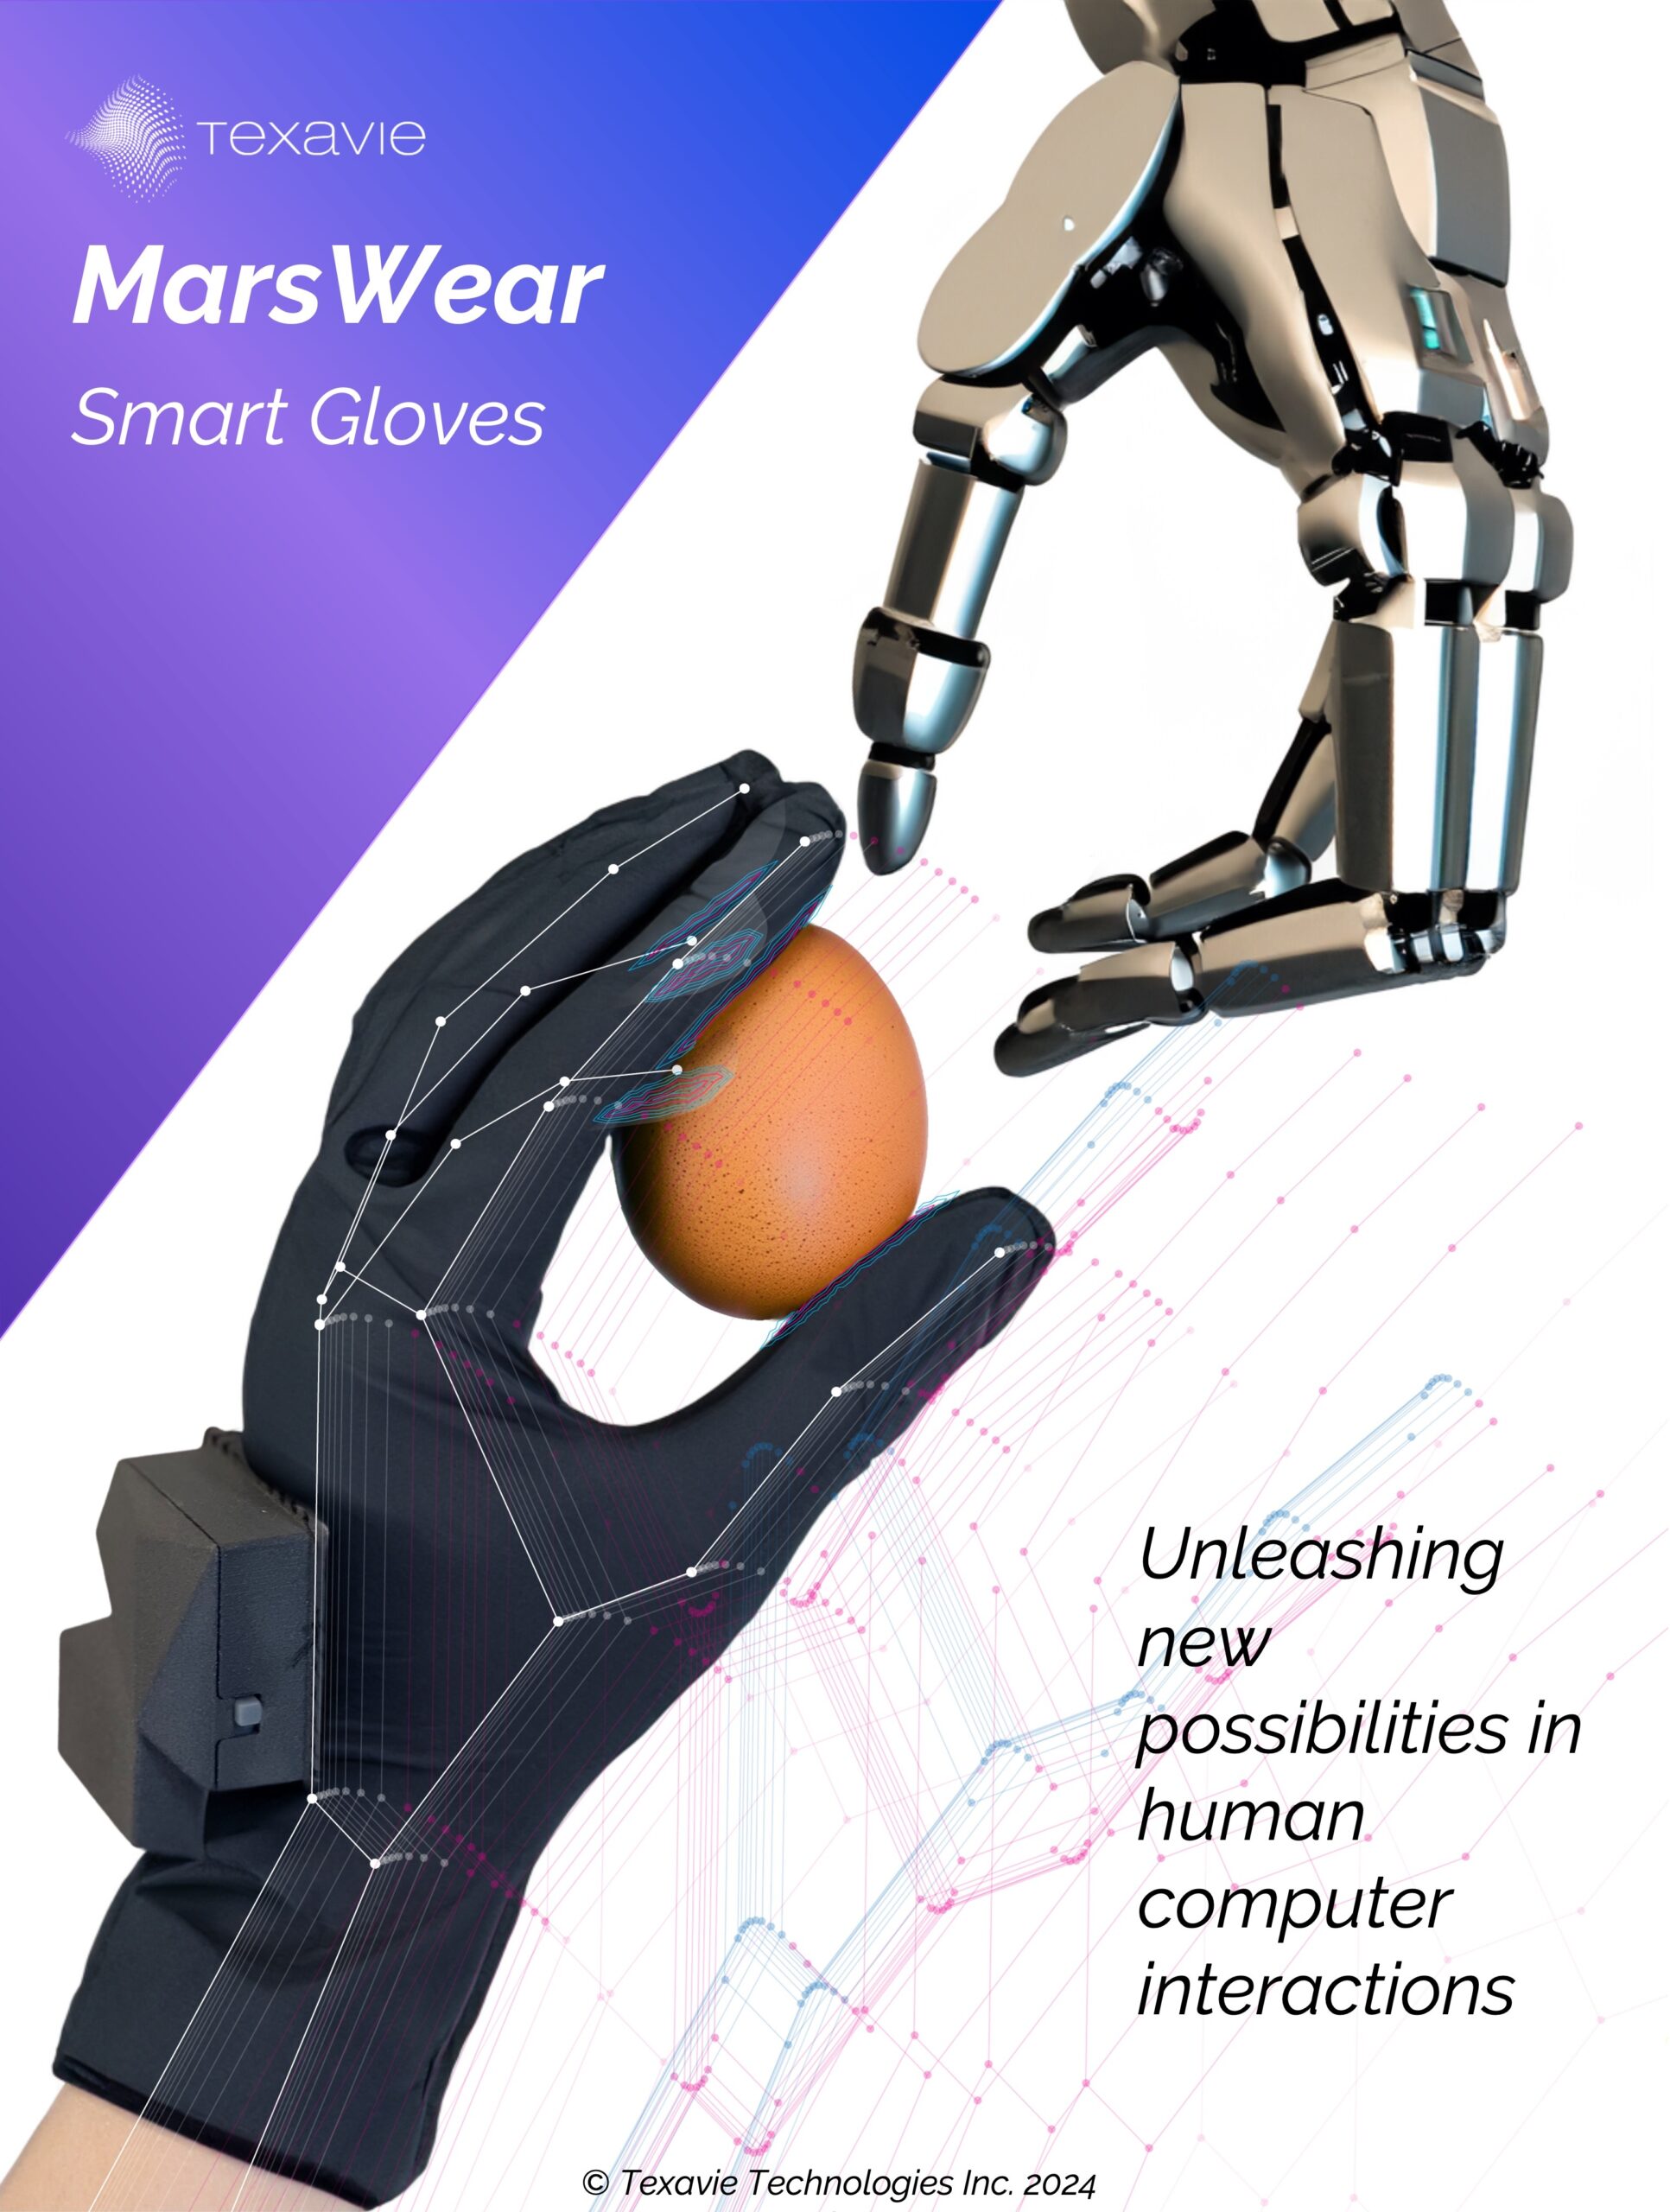 Our MarsWear Smart Gloves push the boundaries of human computer interactions